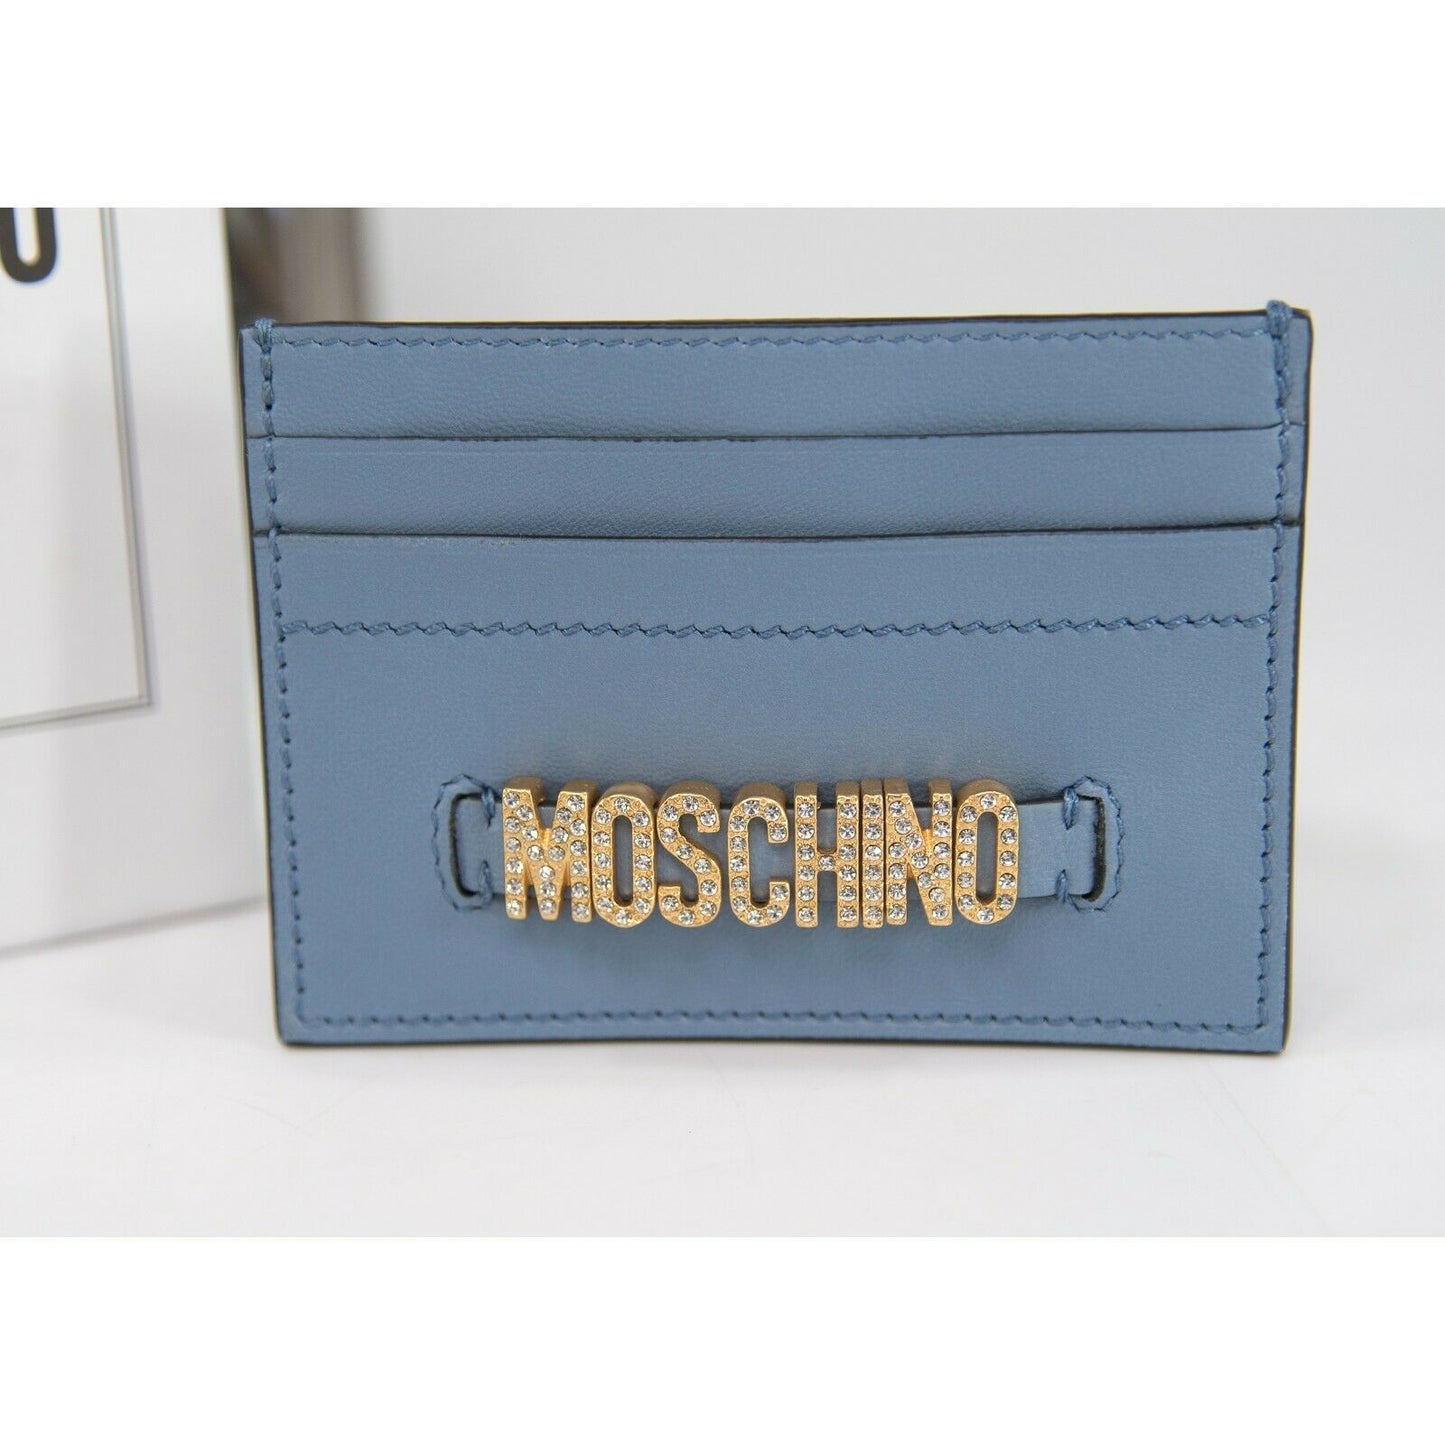 Moschino Couture Dust Blue Crystal Logo Leather Card Case Holder NWT